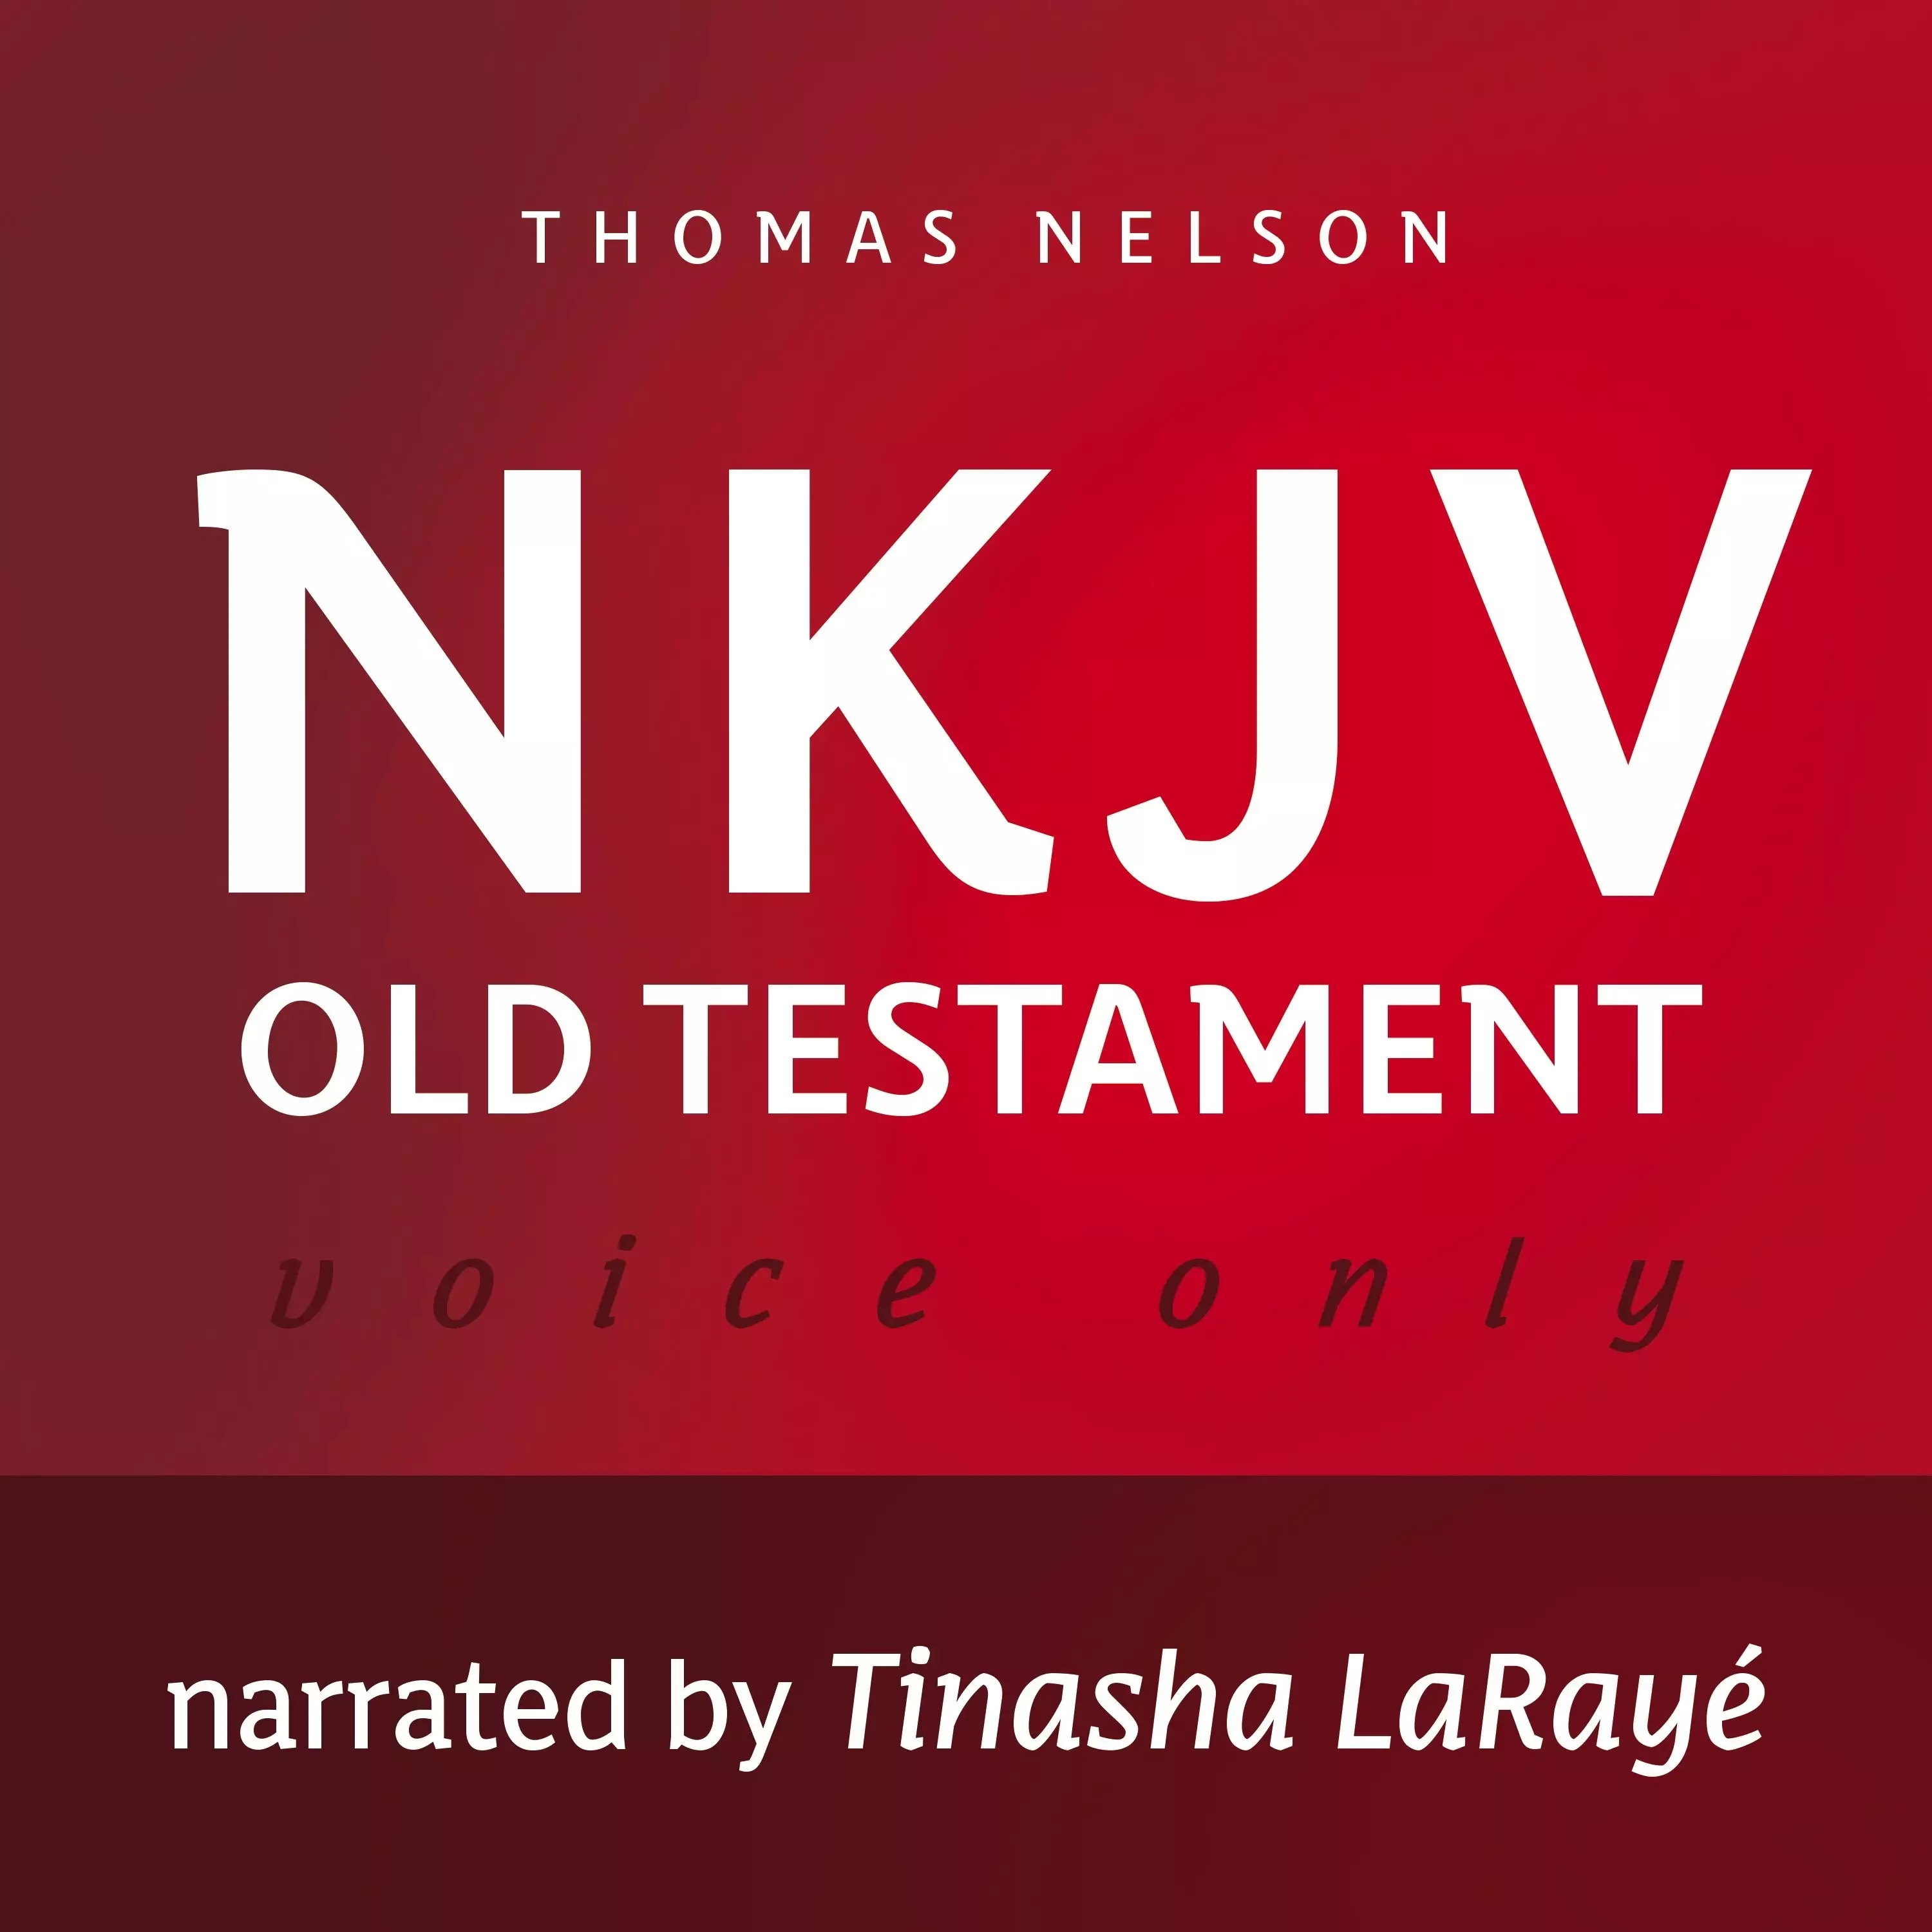 Voice Only Audio Bible - New King James Version, NKJV (Narrated by Tinasha LaRayé): Old Testament